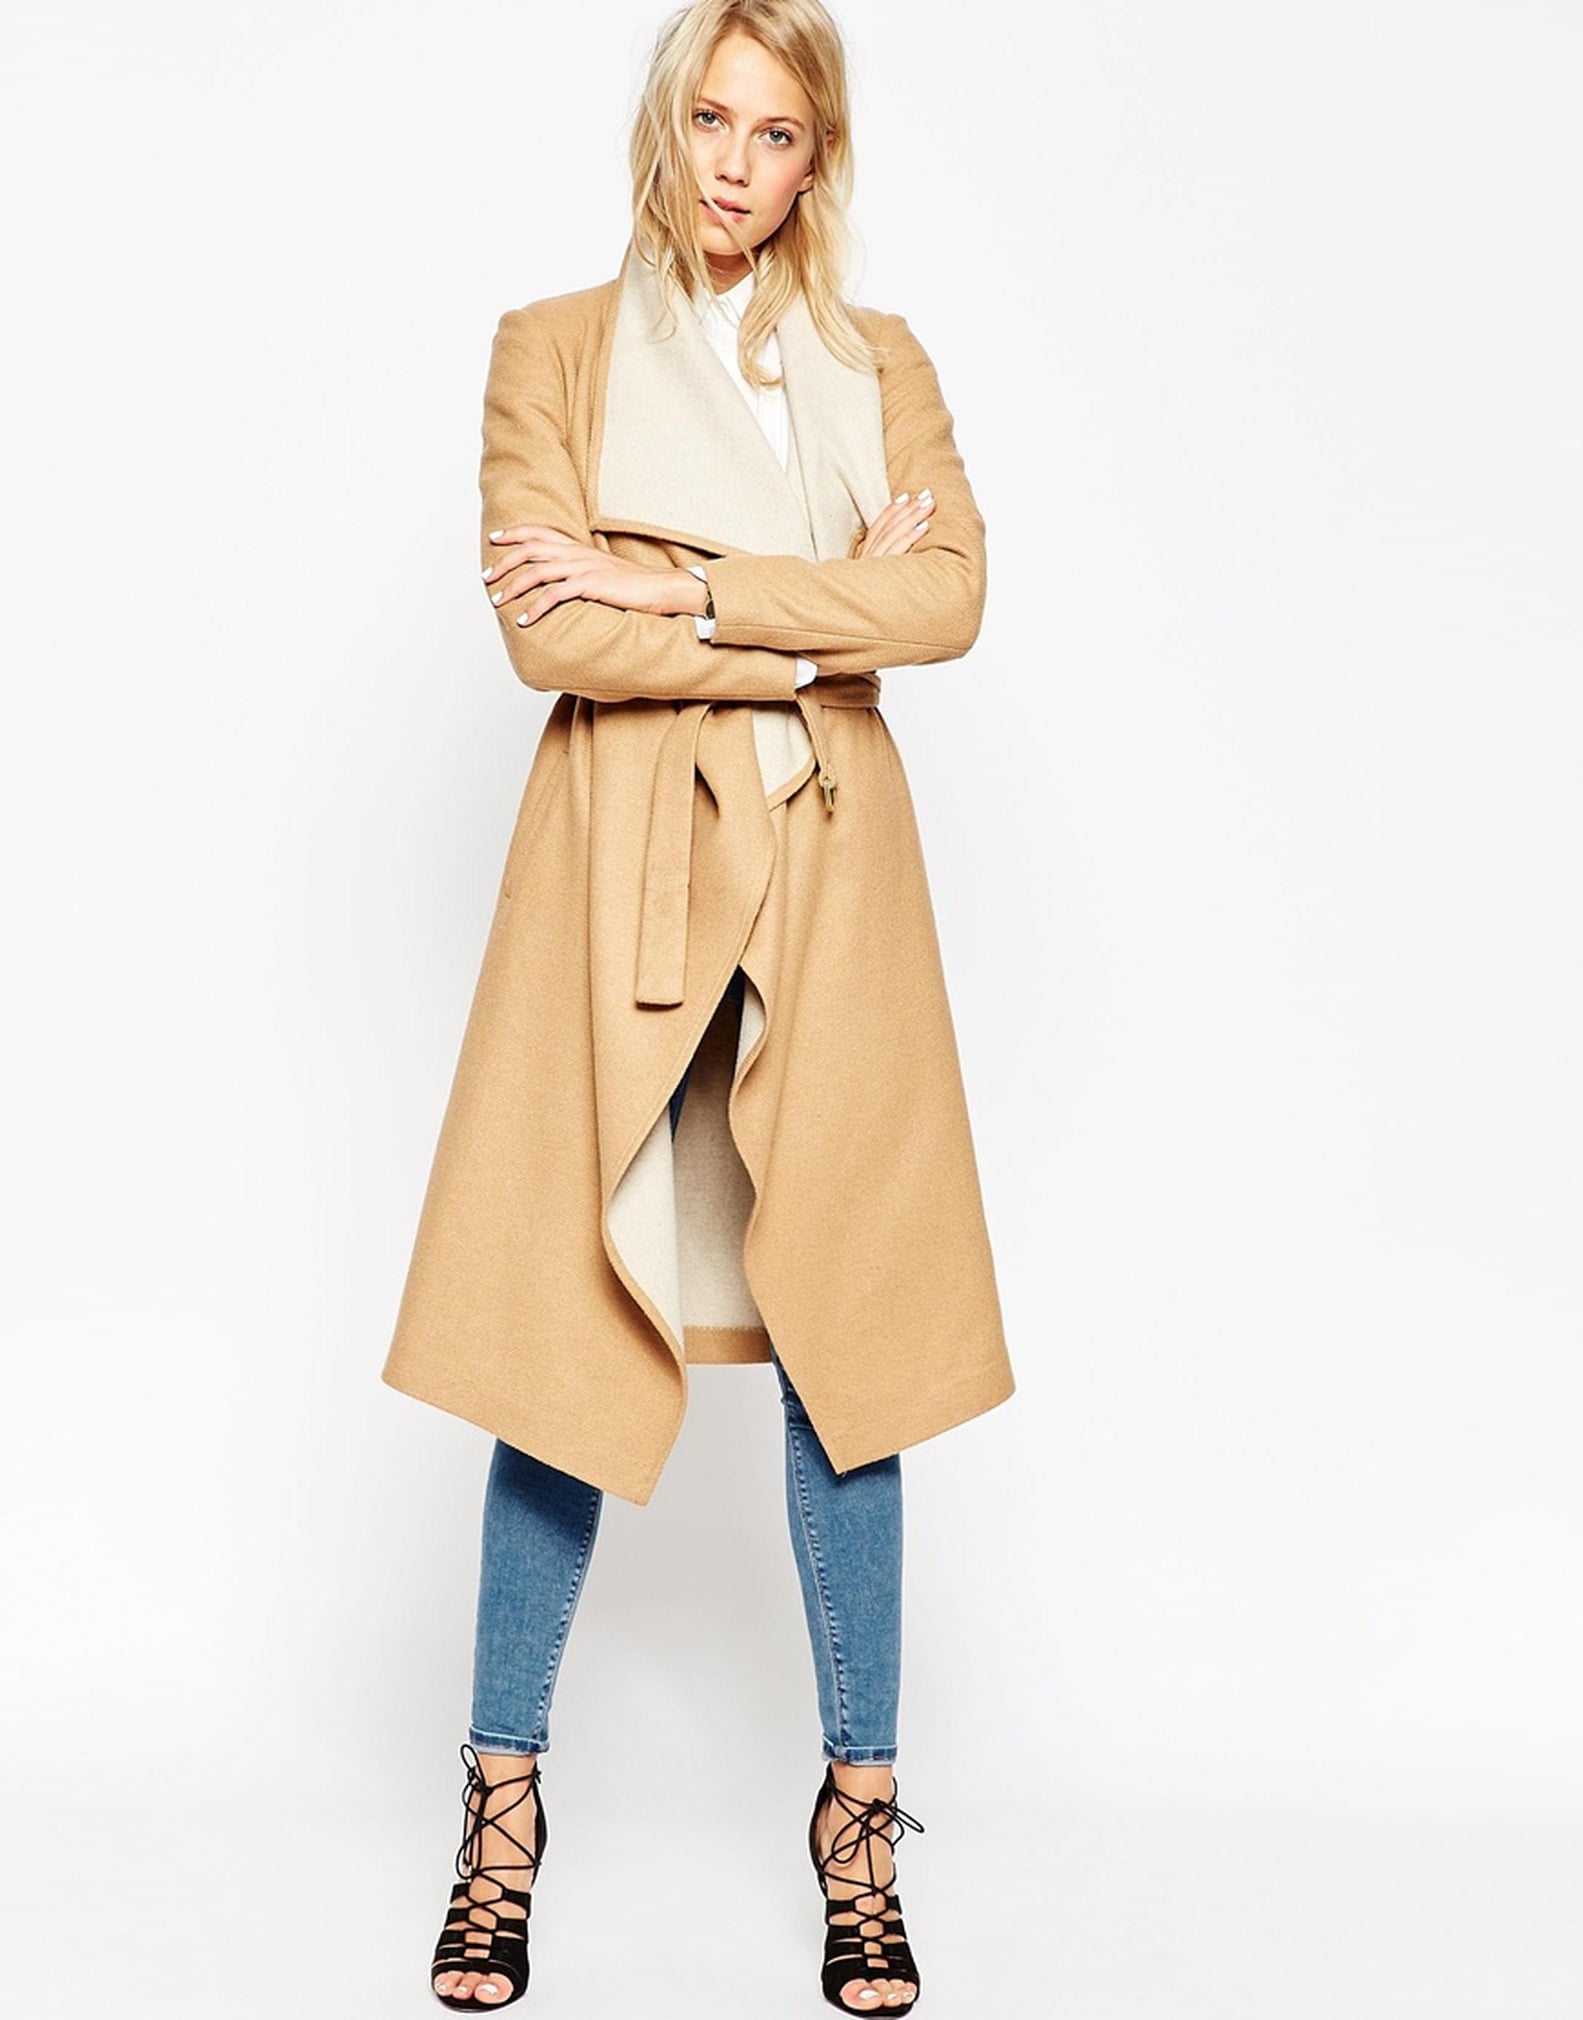 Best Items to Buy For Fall | POPSUGAR Fashion